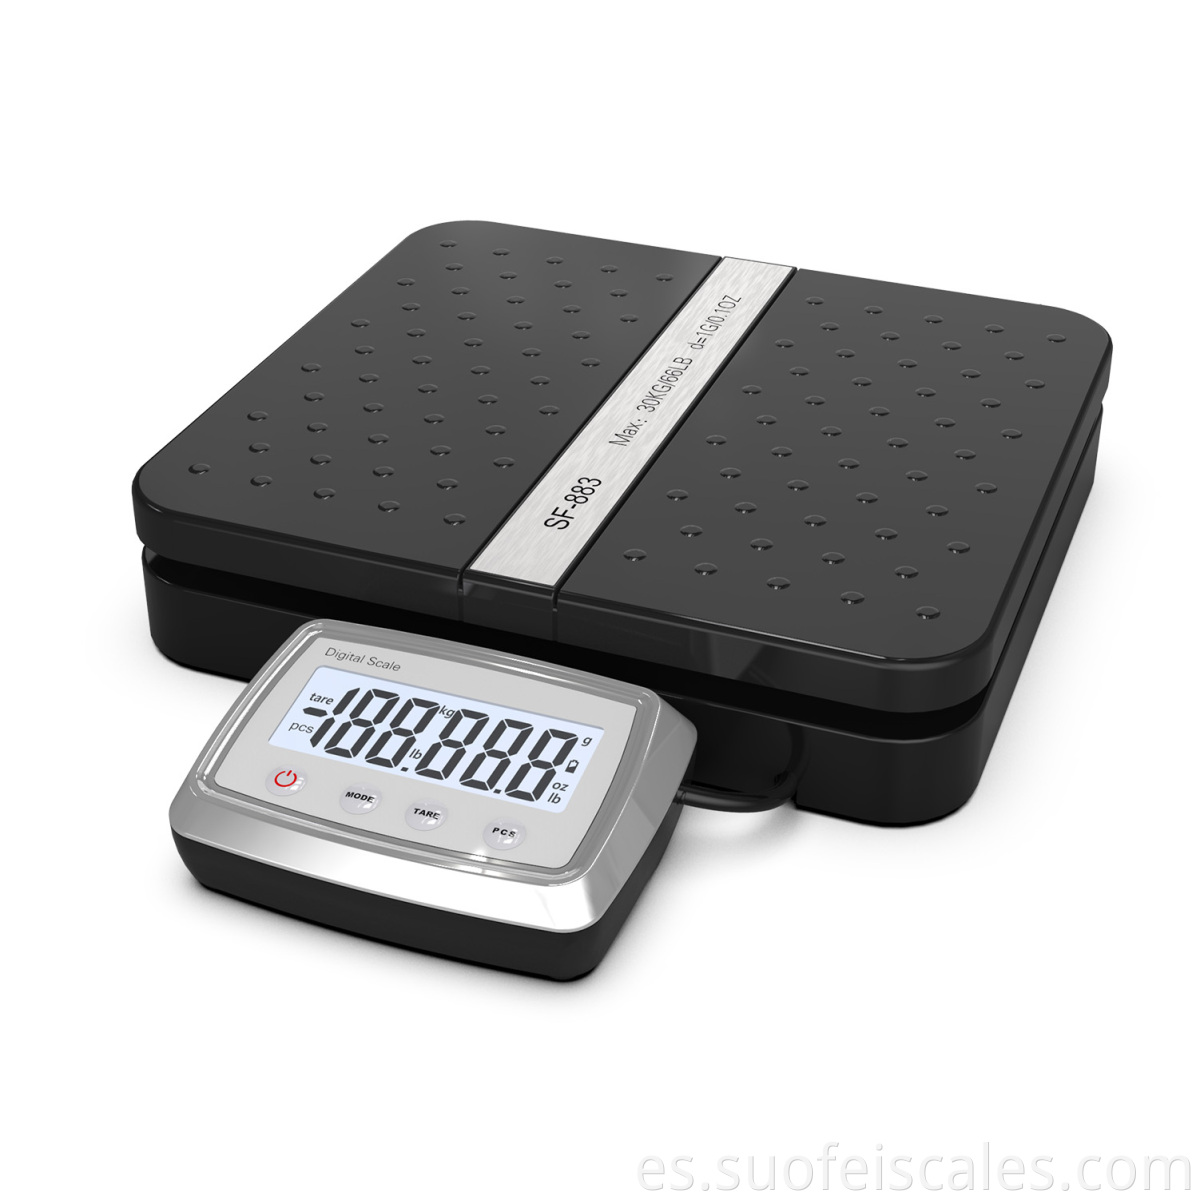 SF-883 66lb 30kg Postal Postage Scale Shipping Scale